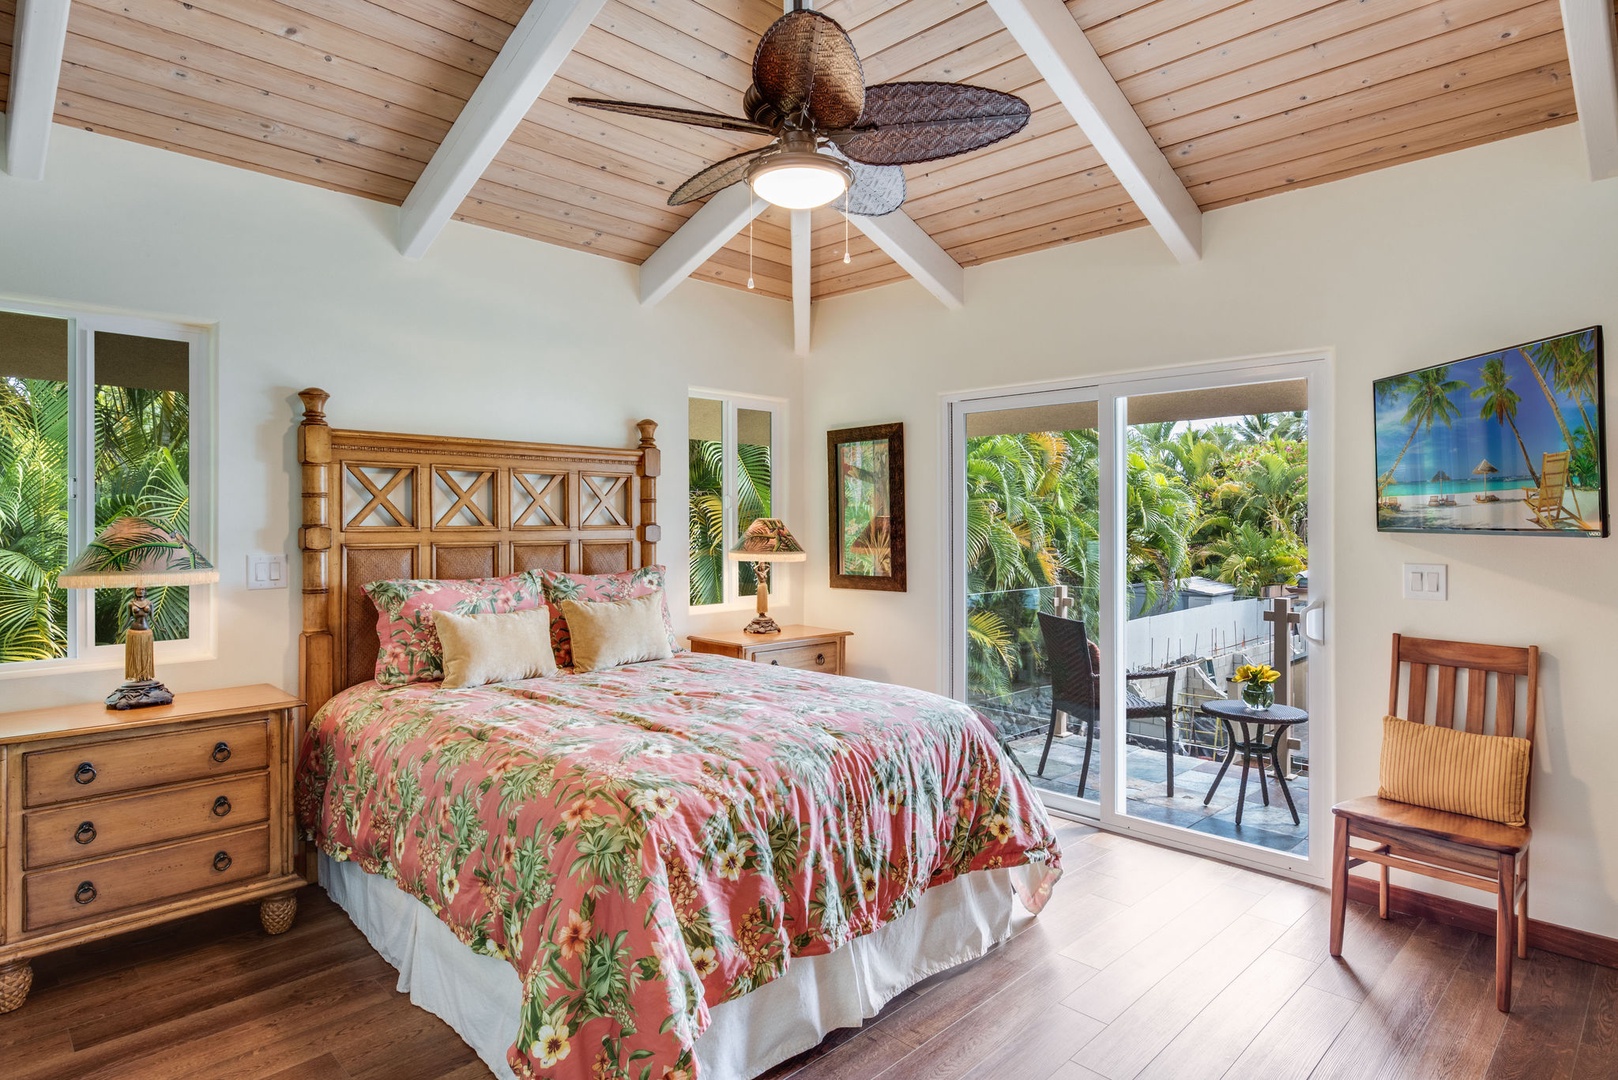 Kailua Kona Vacation Rentals, Kona Beach Bungalows** - Step from the Moku Primary Suite directly to your private lanai sanctuary.